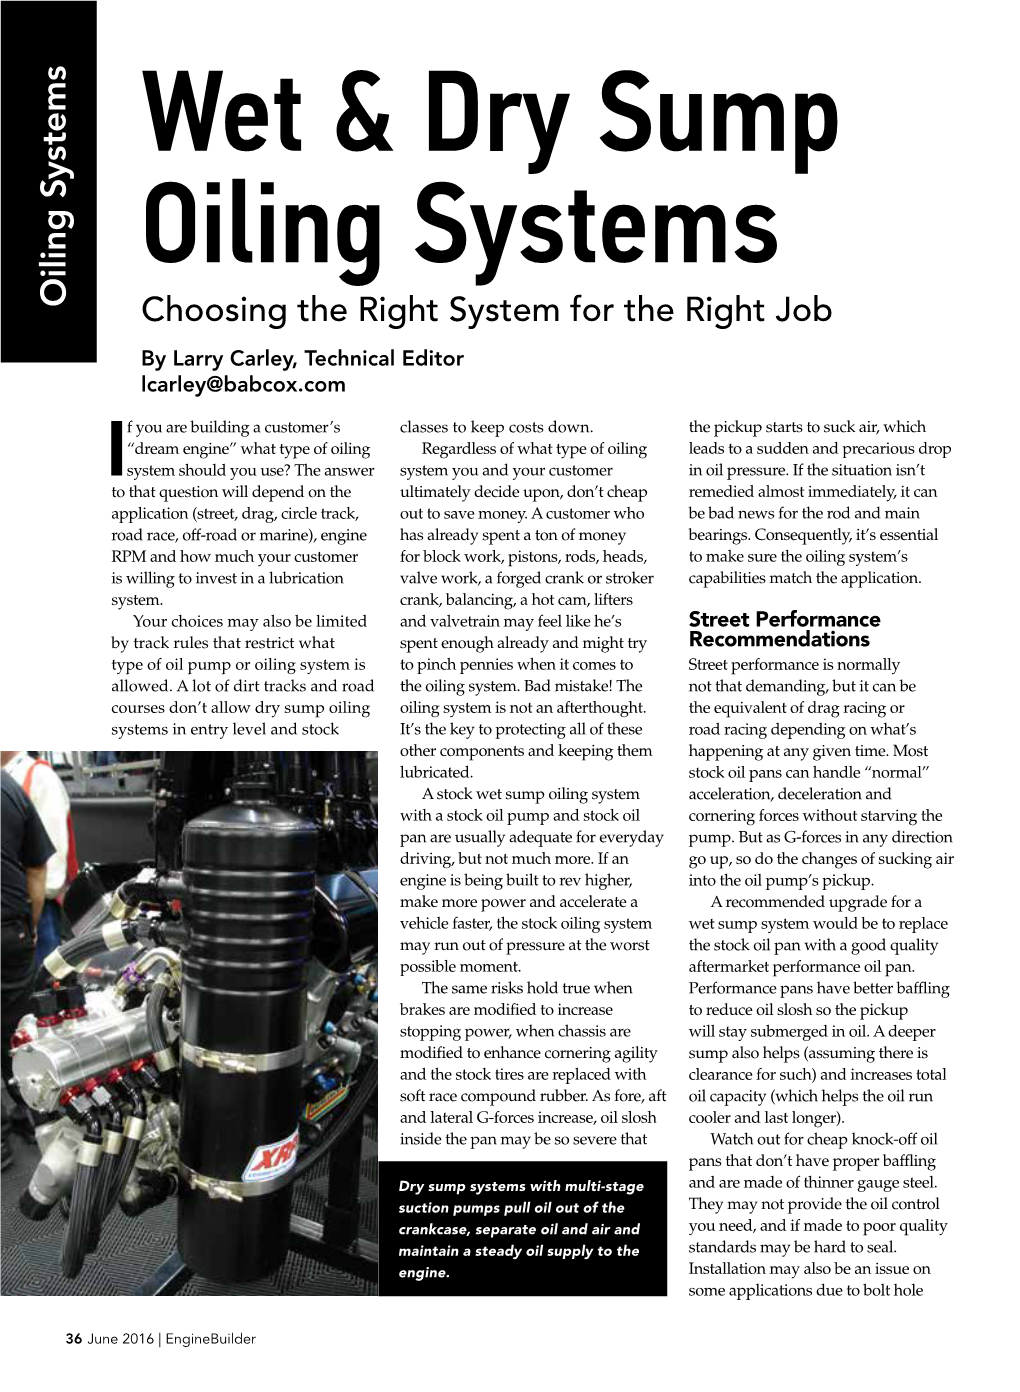 Wet & Dry Sump Oiling Systems